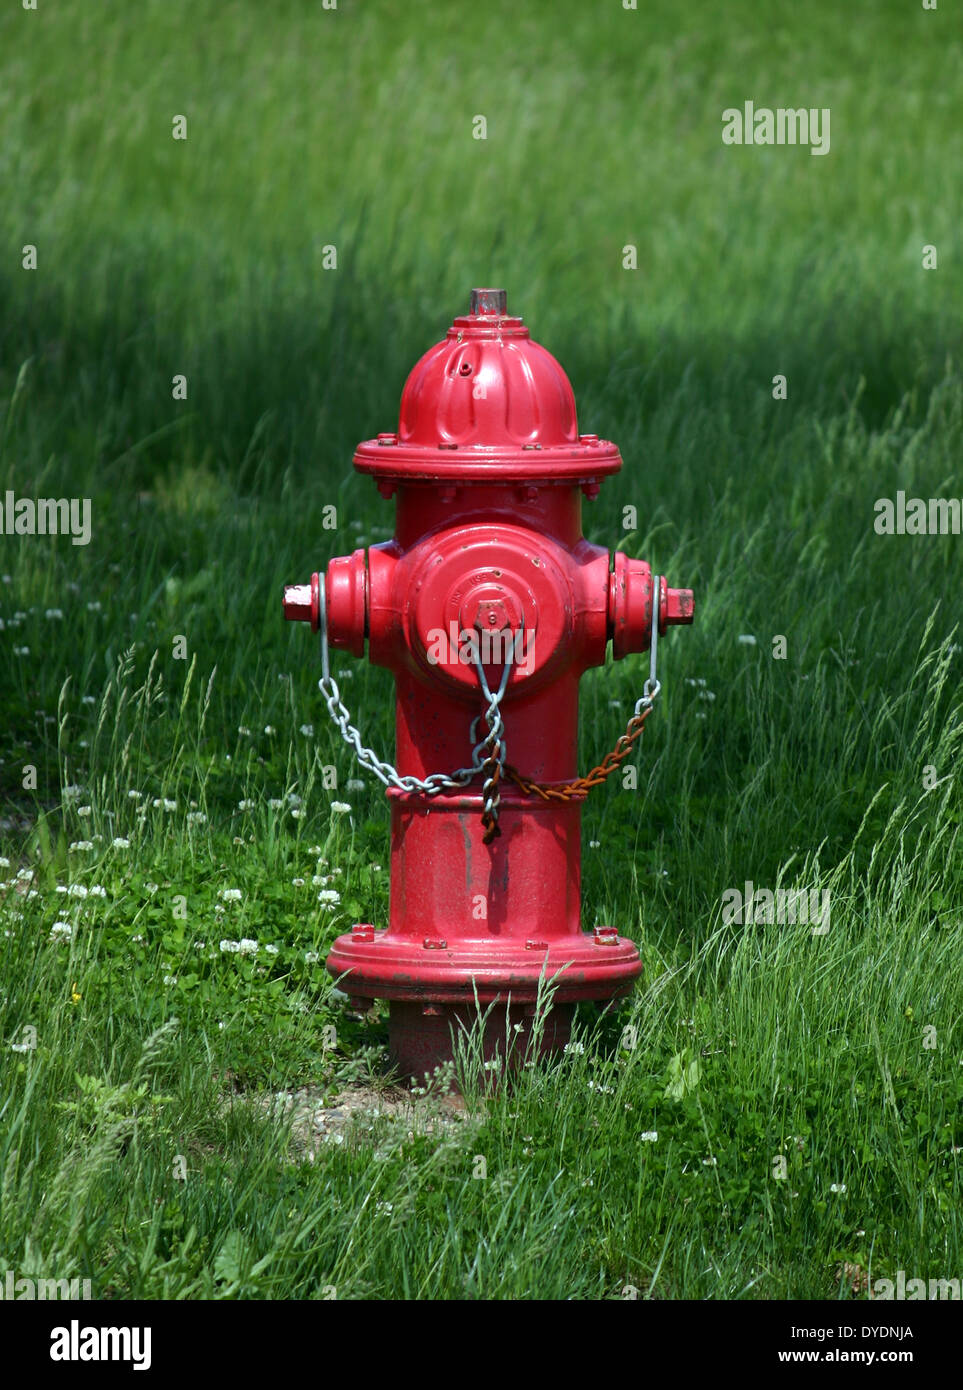 A red fire hydrant against a green lawn Stock Photo